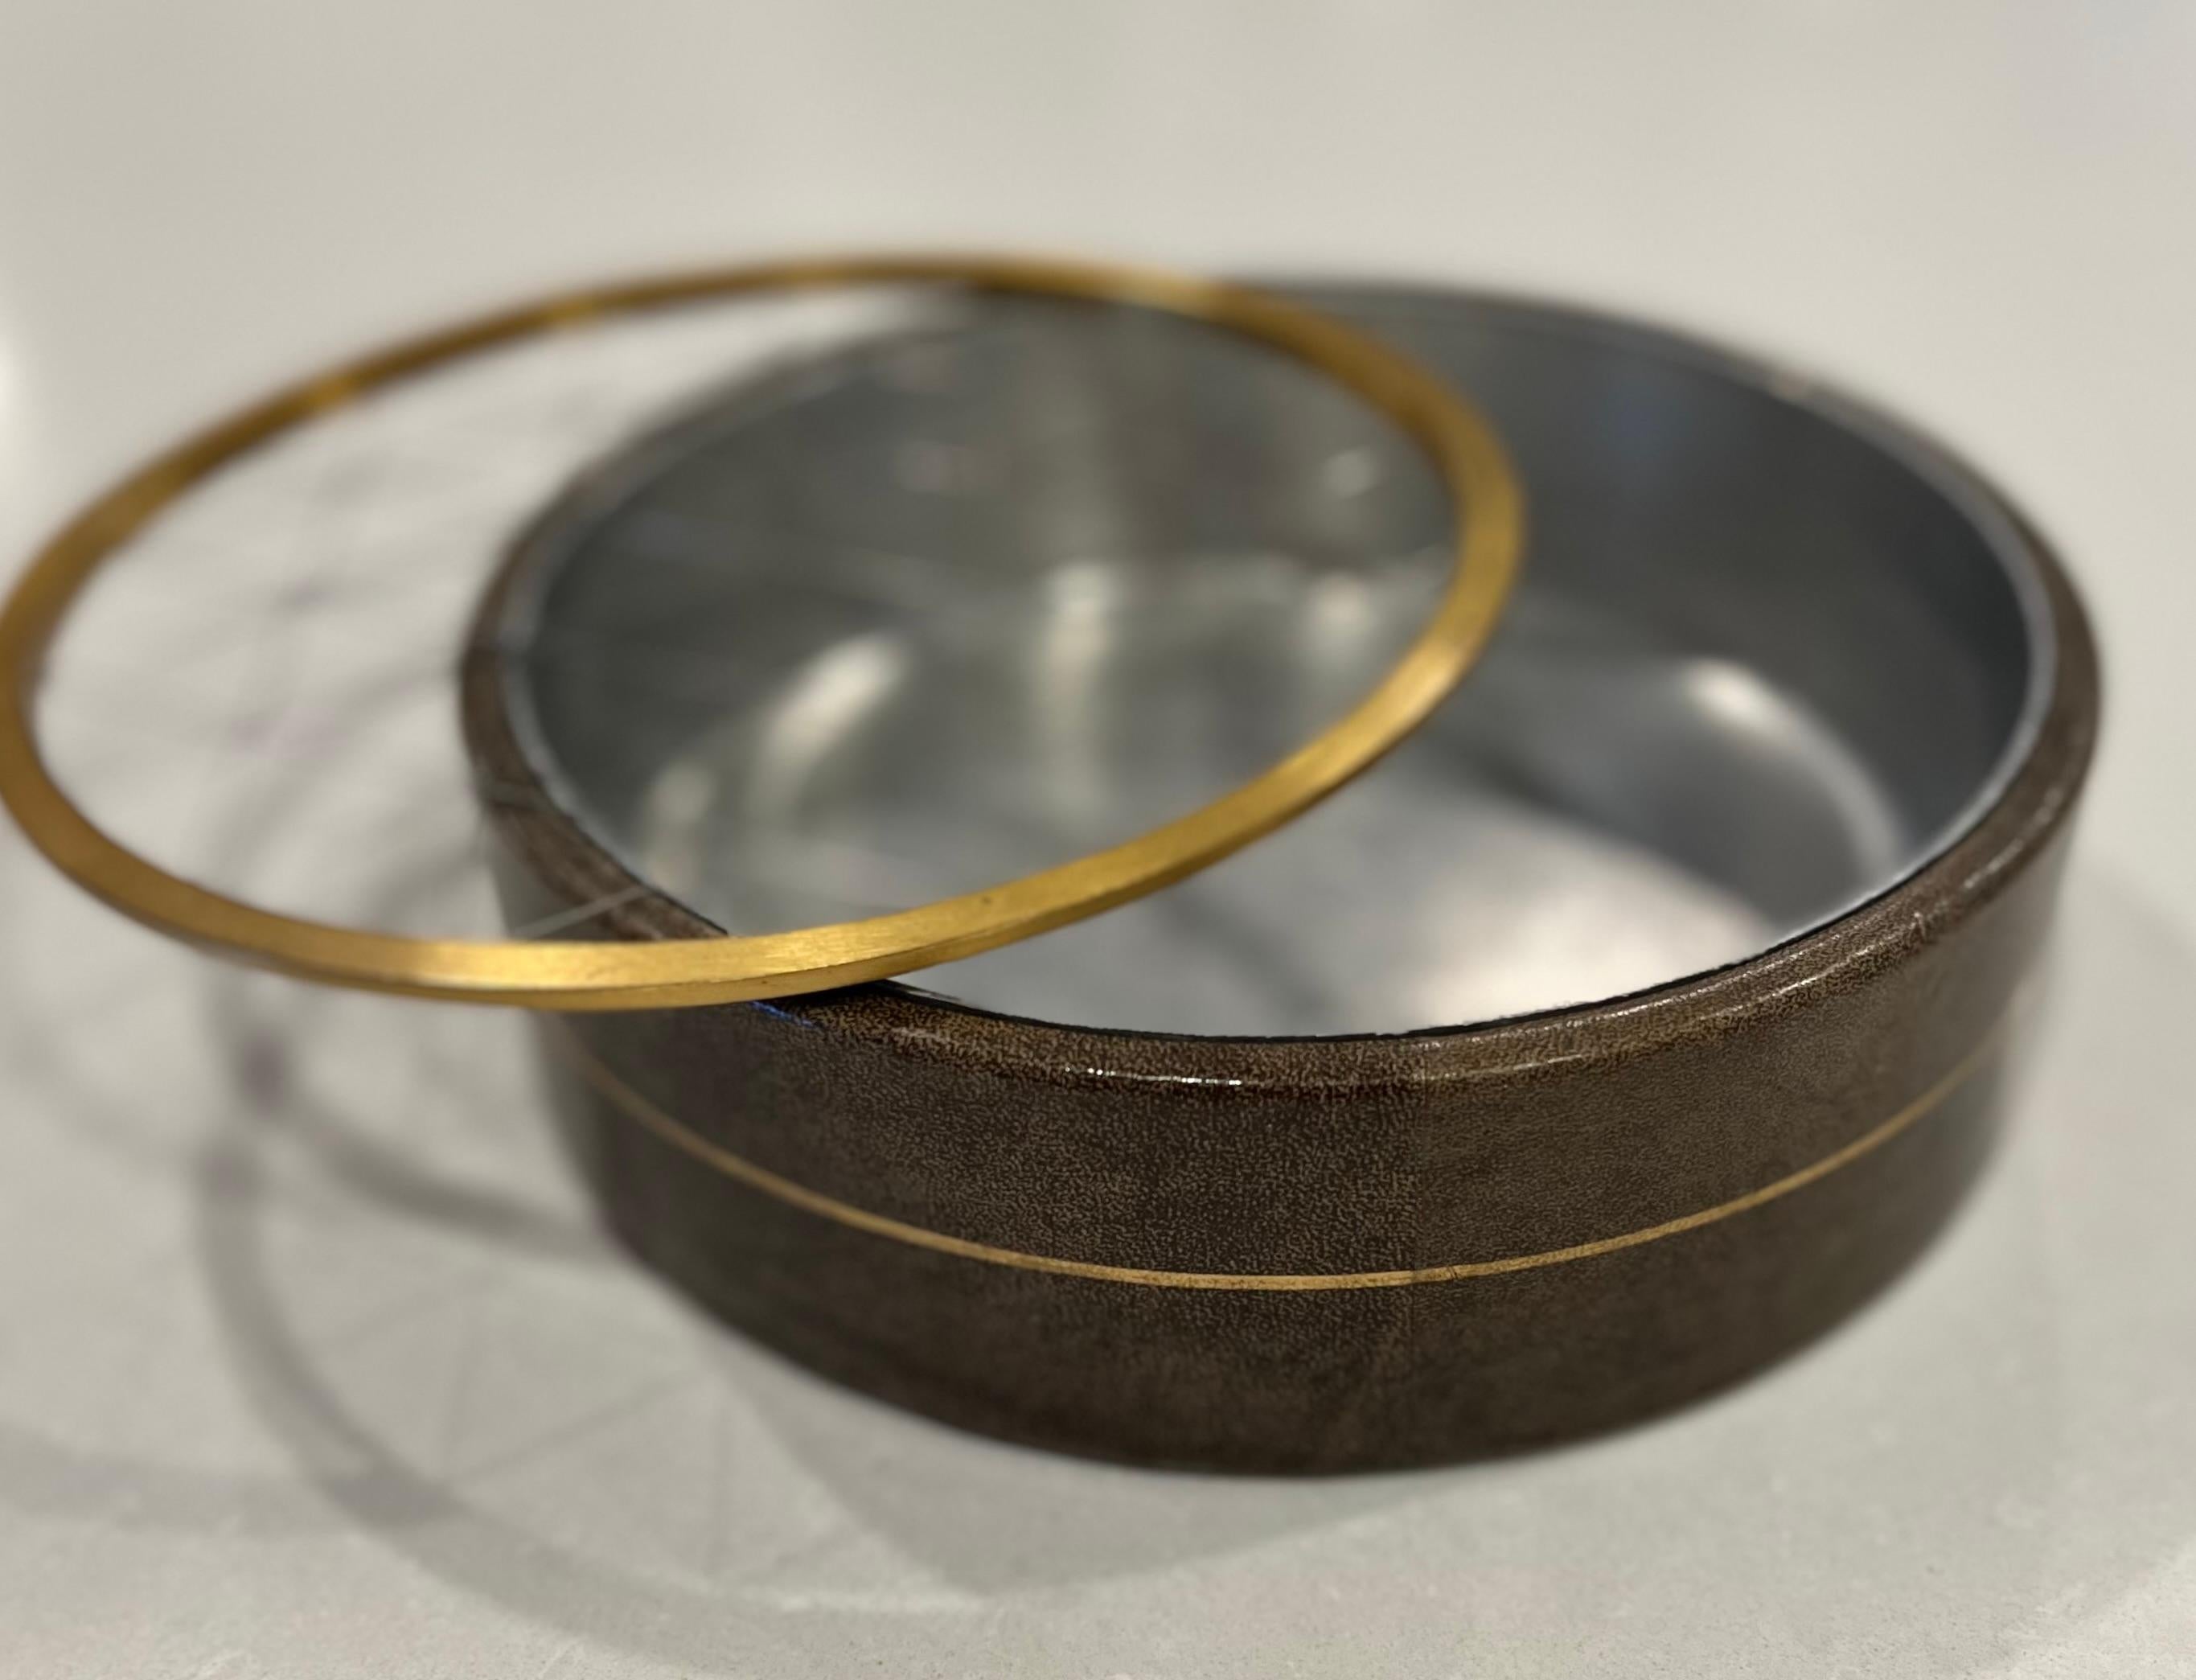 Charming Mid-Century Modern Arthur Hertzberg & Craftsmen leather and brass wire ashtray.   This ashtray dates back to 1950 and features a solid brass ring that holds stainless steel wire taut in an eye-catching criss-cross pattern at the rim,